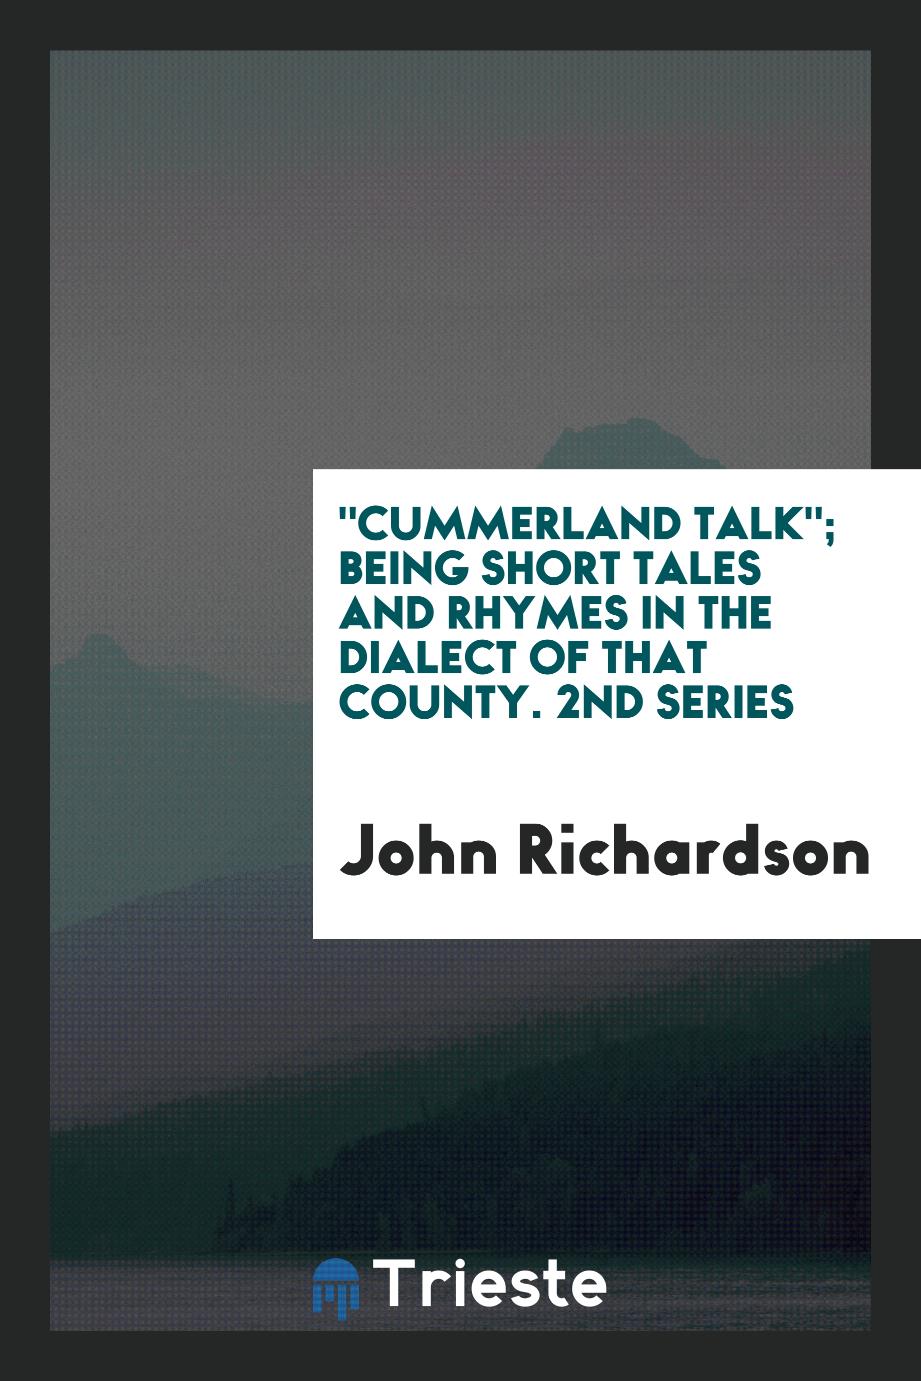 "Cummerland talk"; being short tales and rhymes in the dialect of that county. 2nd series